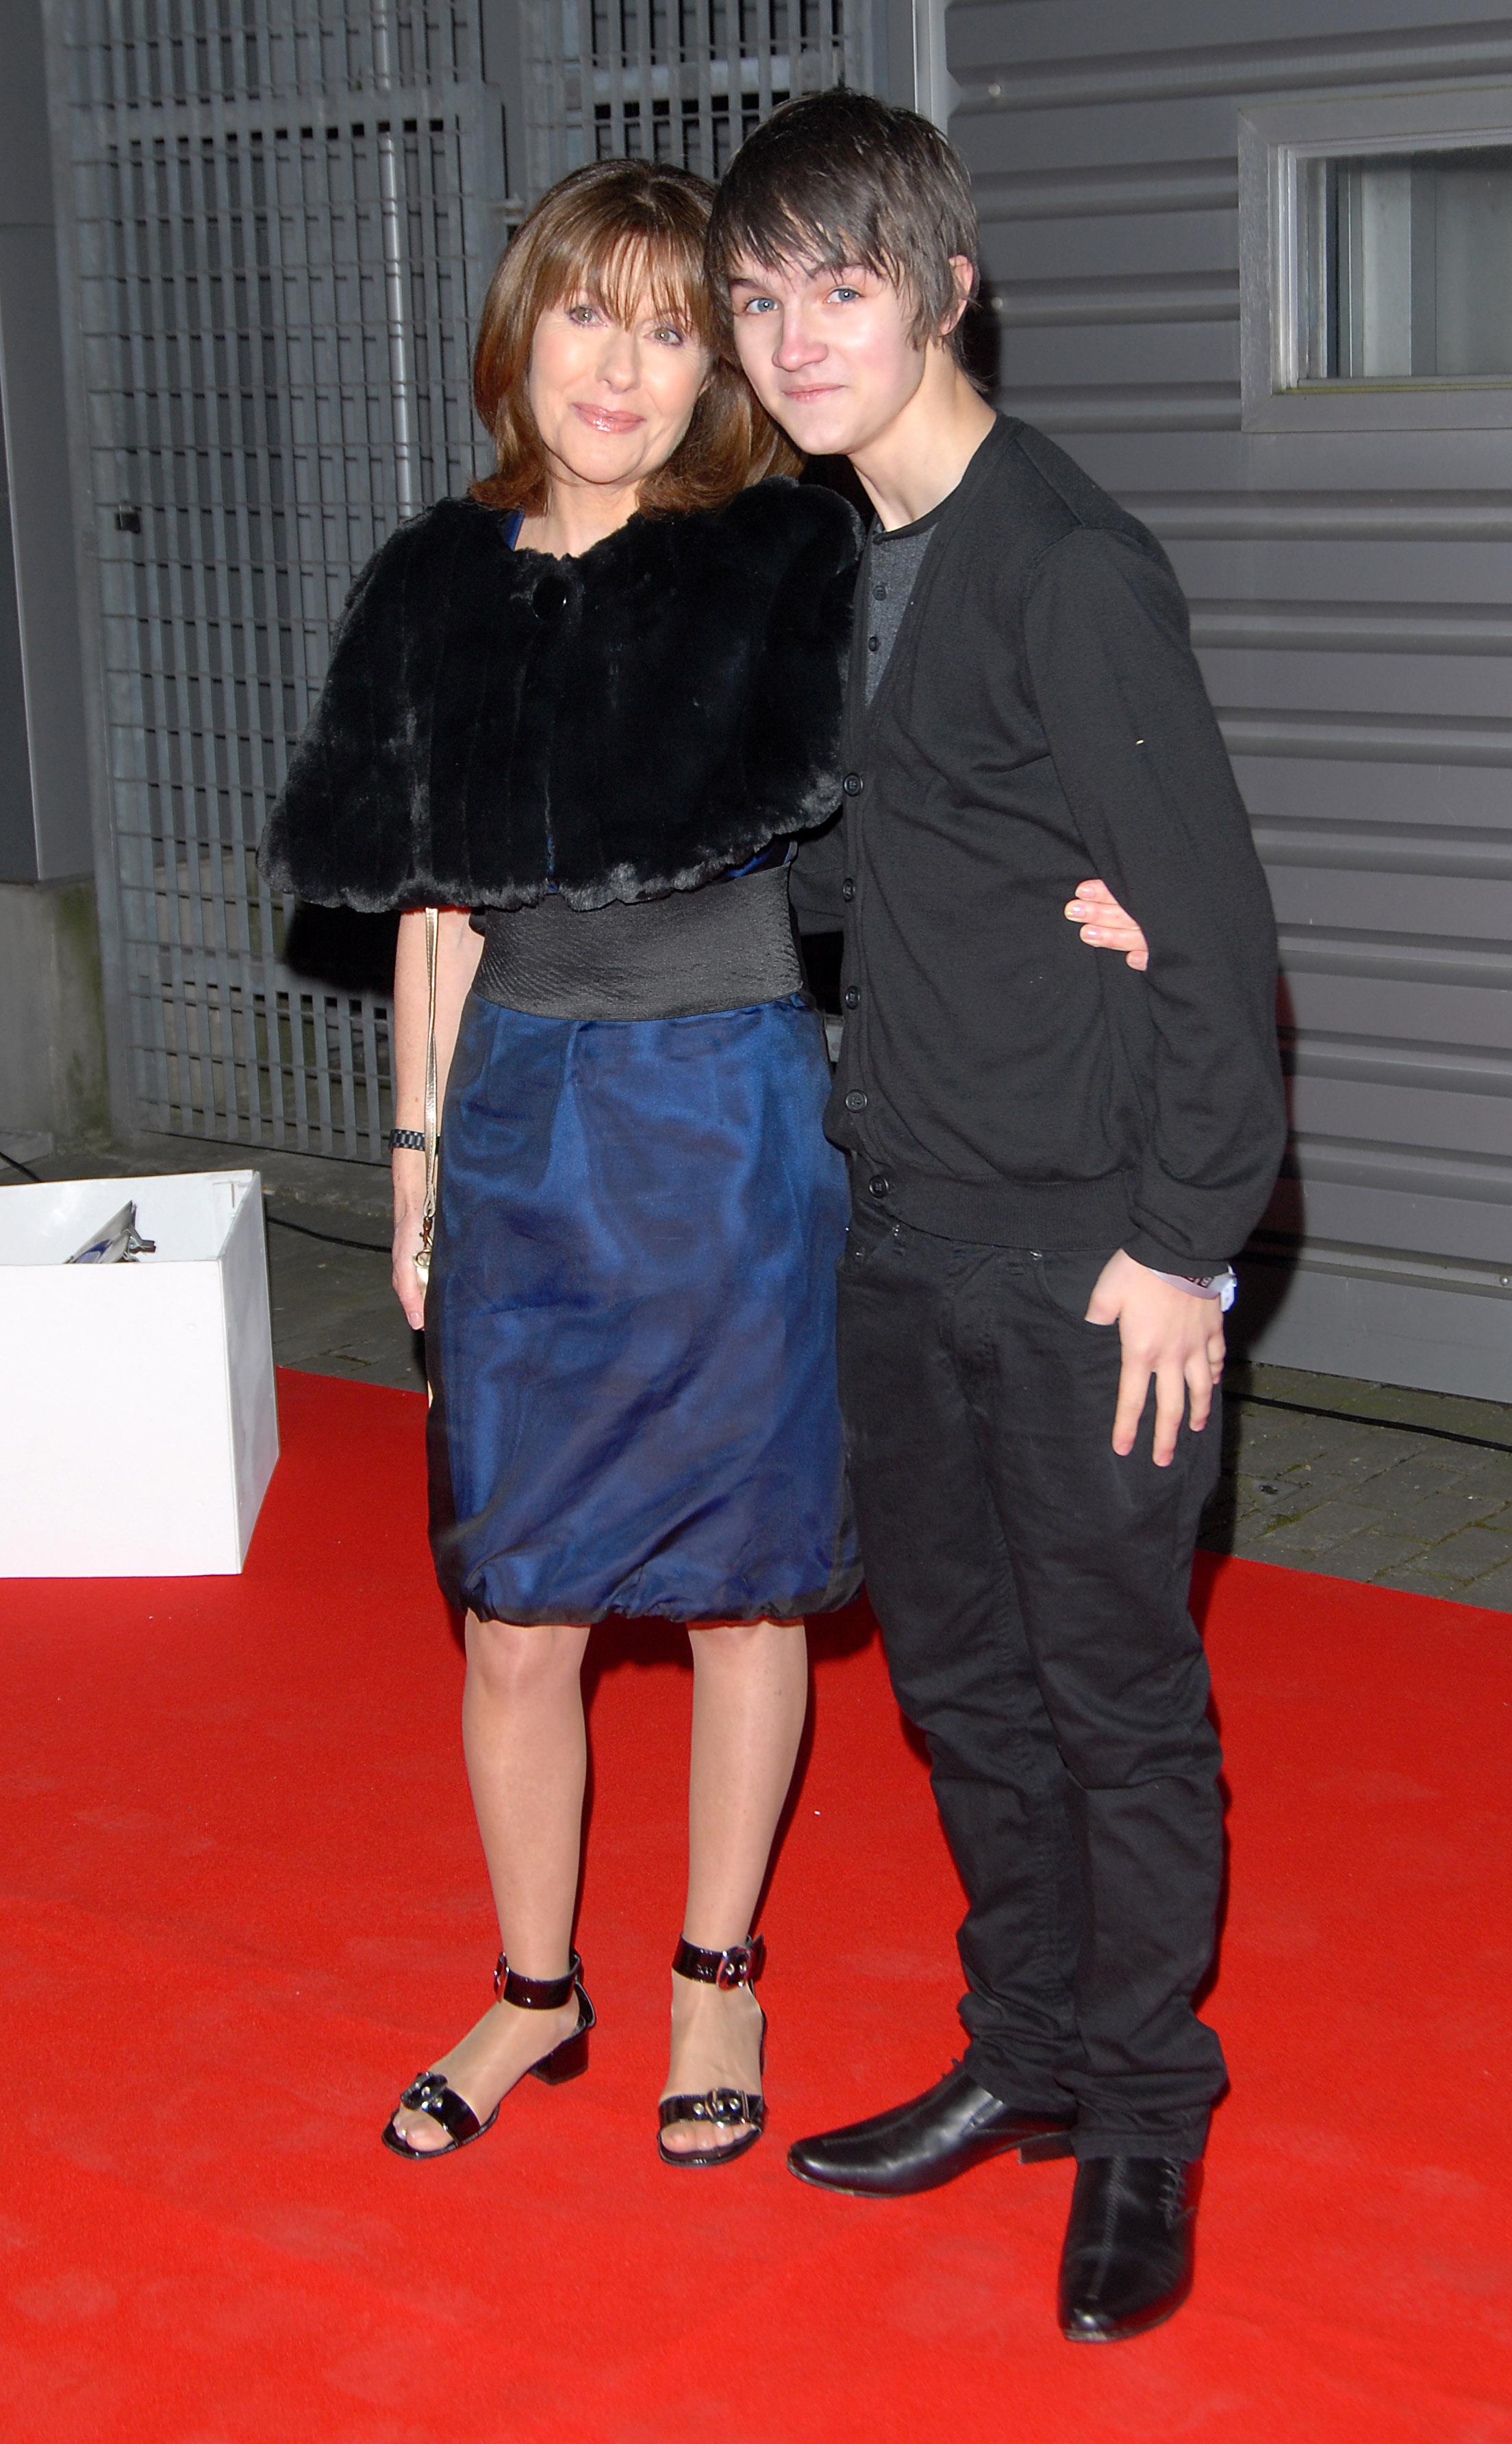 Tommy Knight and Elisabeth Sladen at the Screening of 'Dr. Who, Voyage of the Damned' 18 Dec 2007